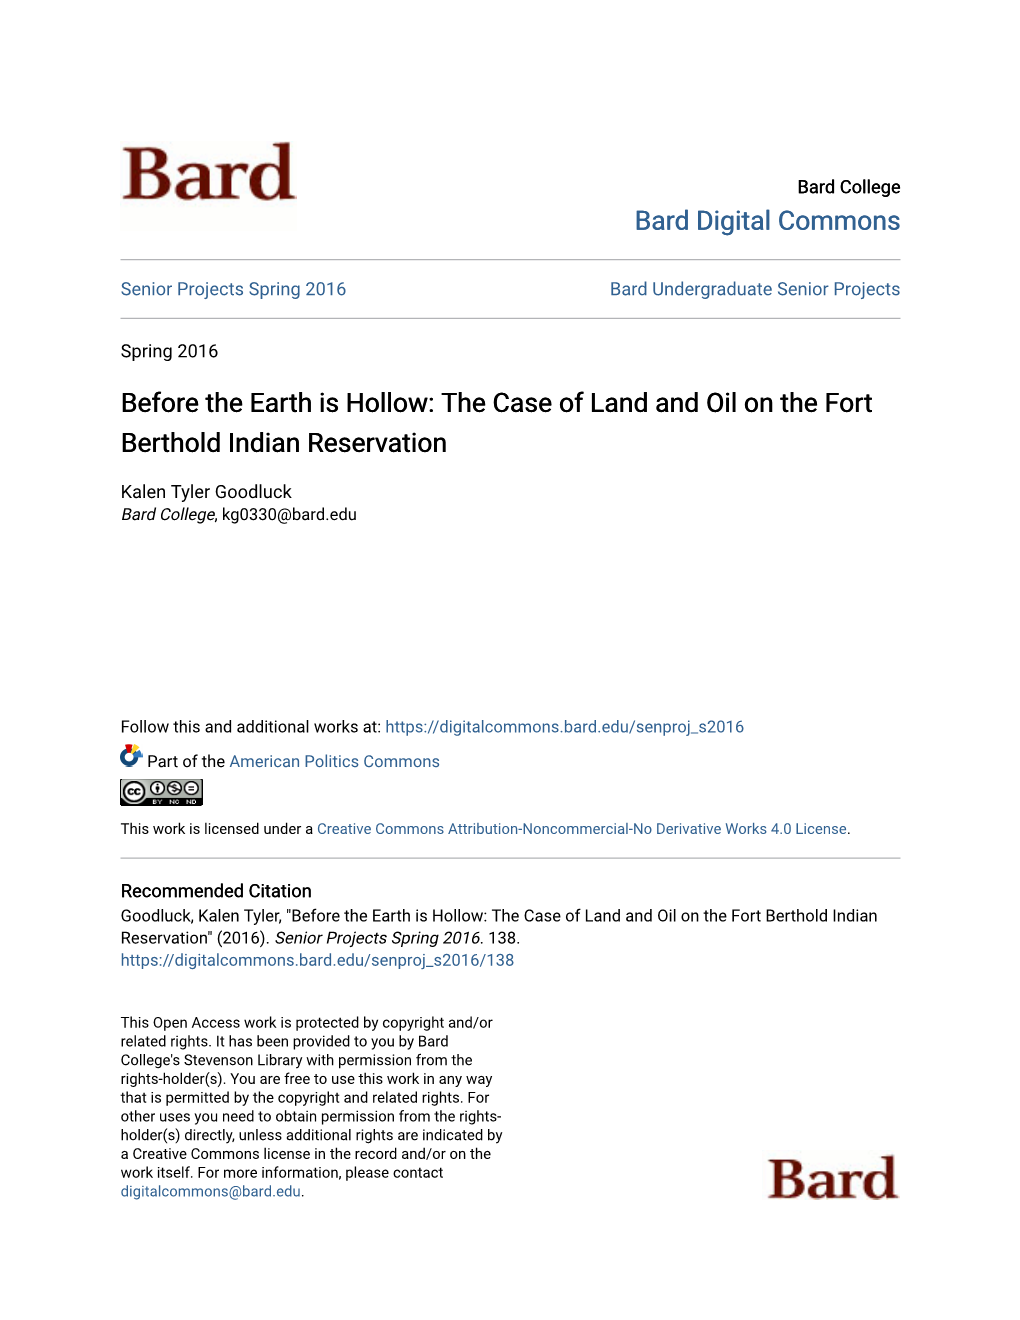 Before the Earth Is Hollow: the Case of Land and Oil on the Fort Berthold Indian Reservation